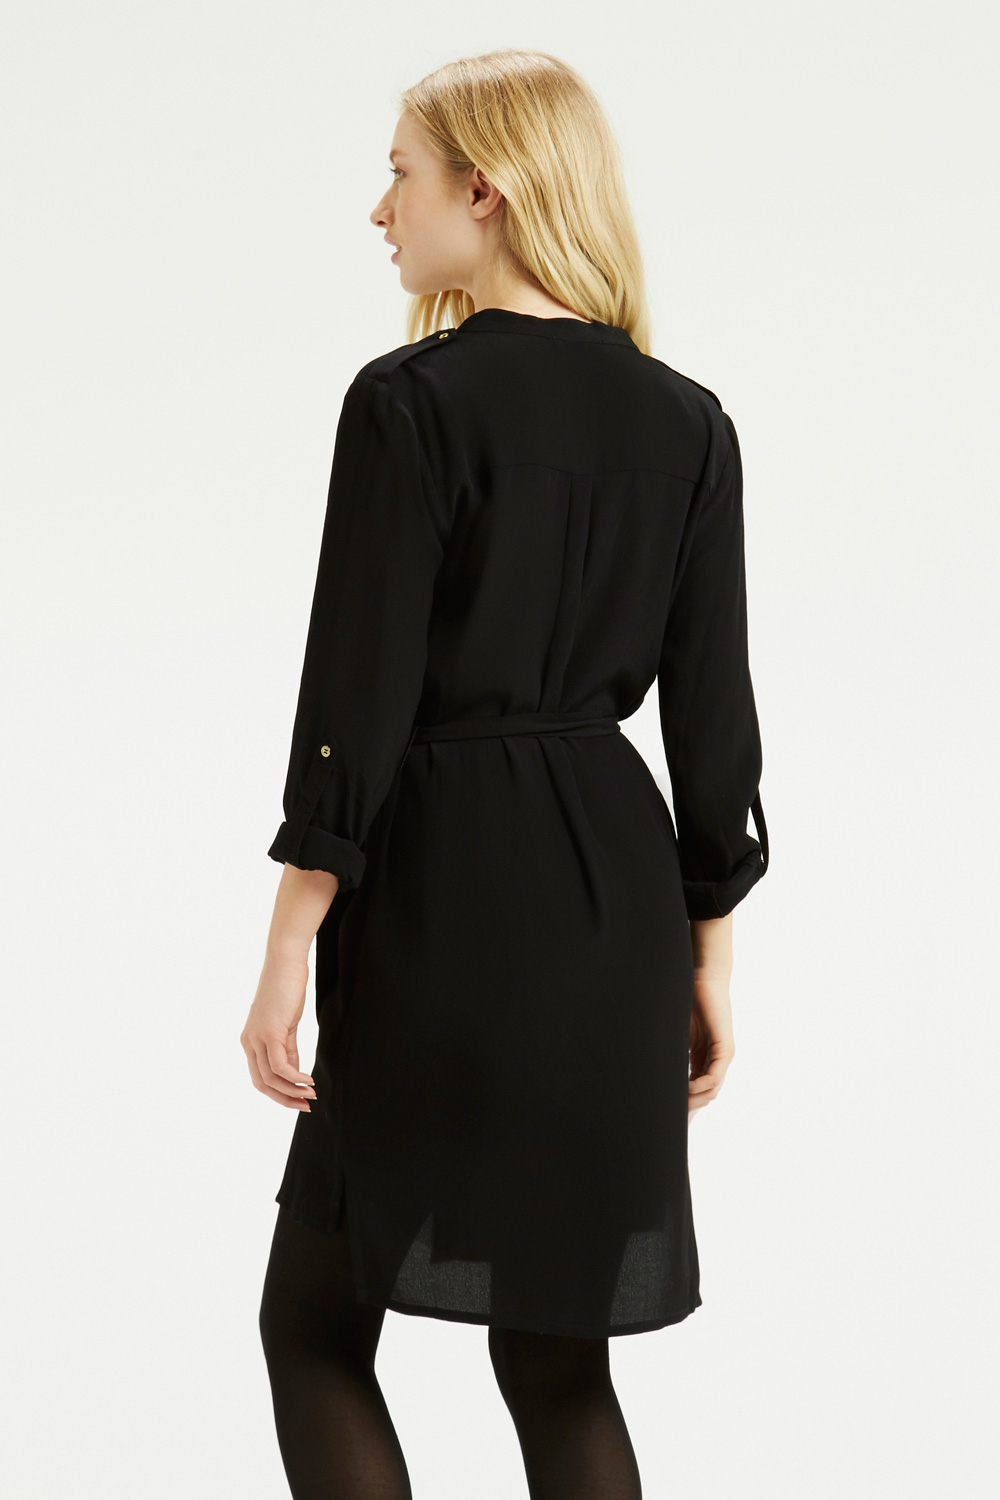  Oasis  Belted Shirt  Dress  in Black Lyst